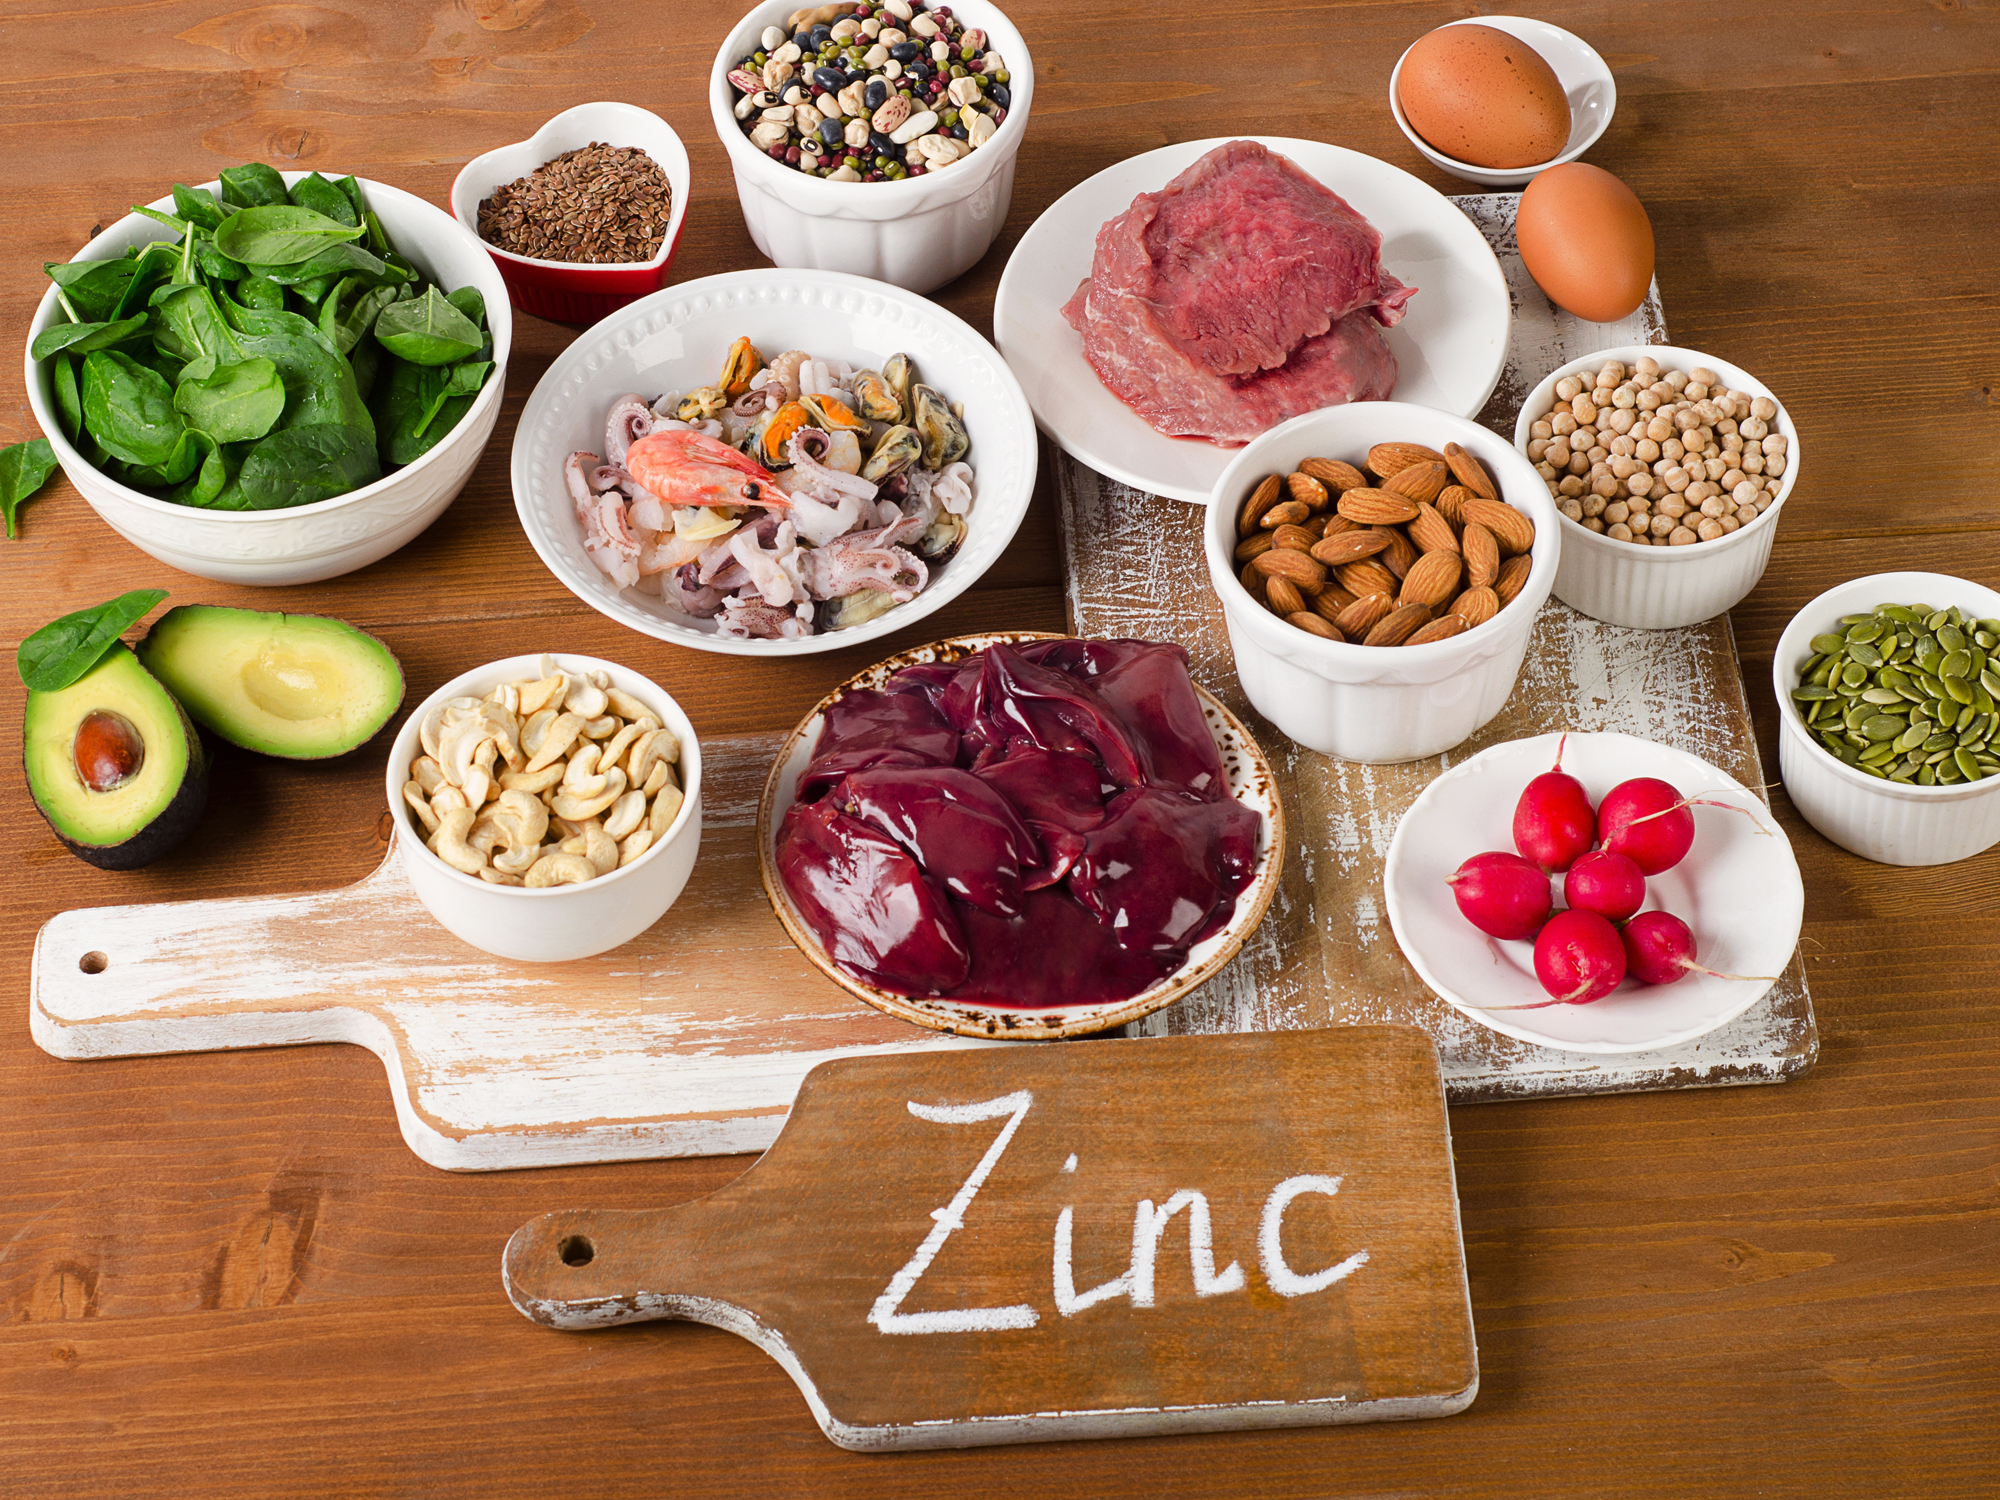 Zinc fights more than colds… it fights cancer